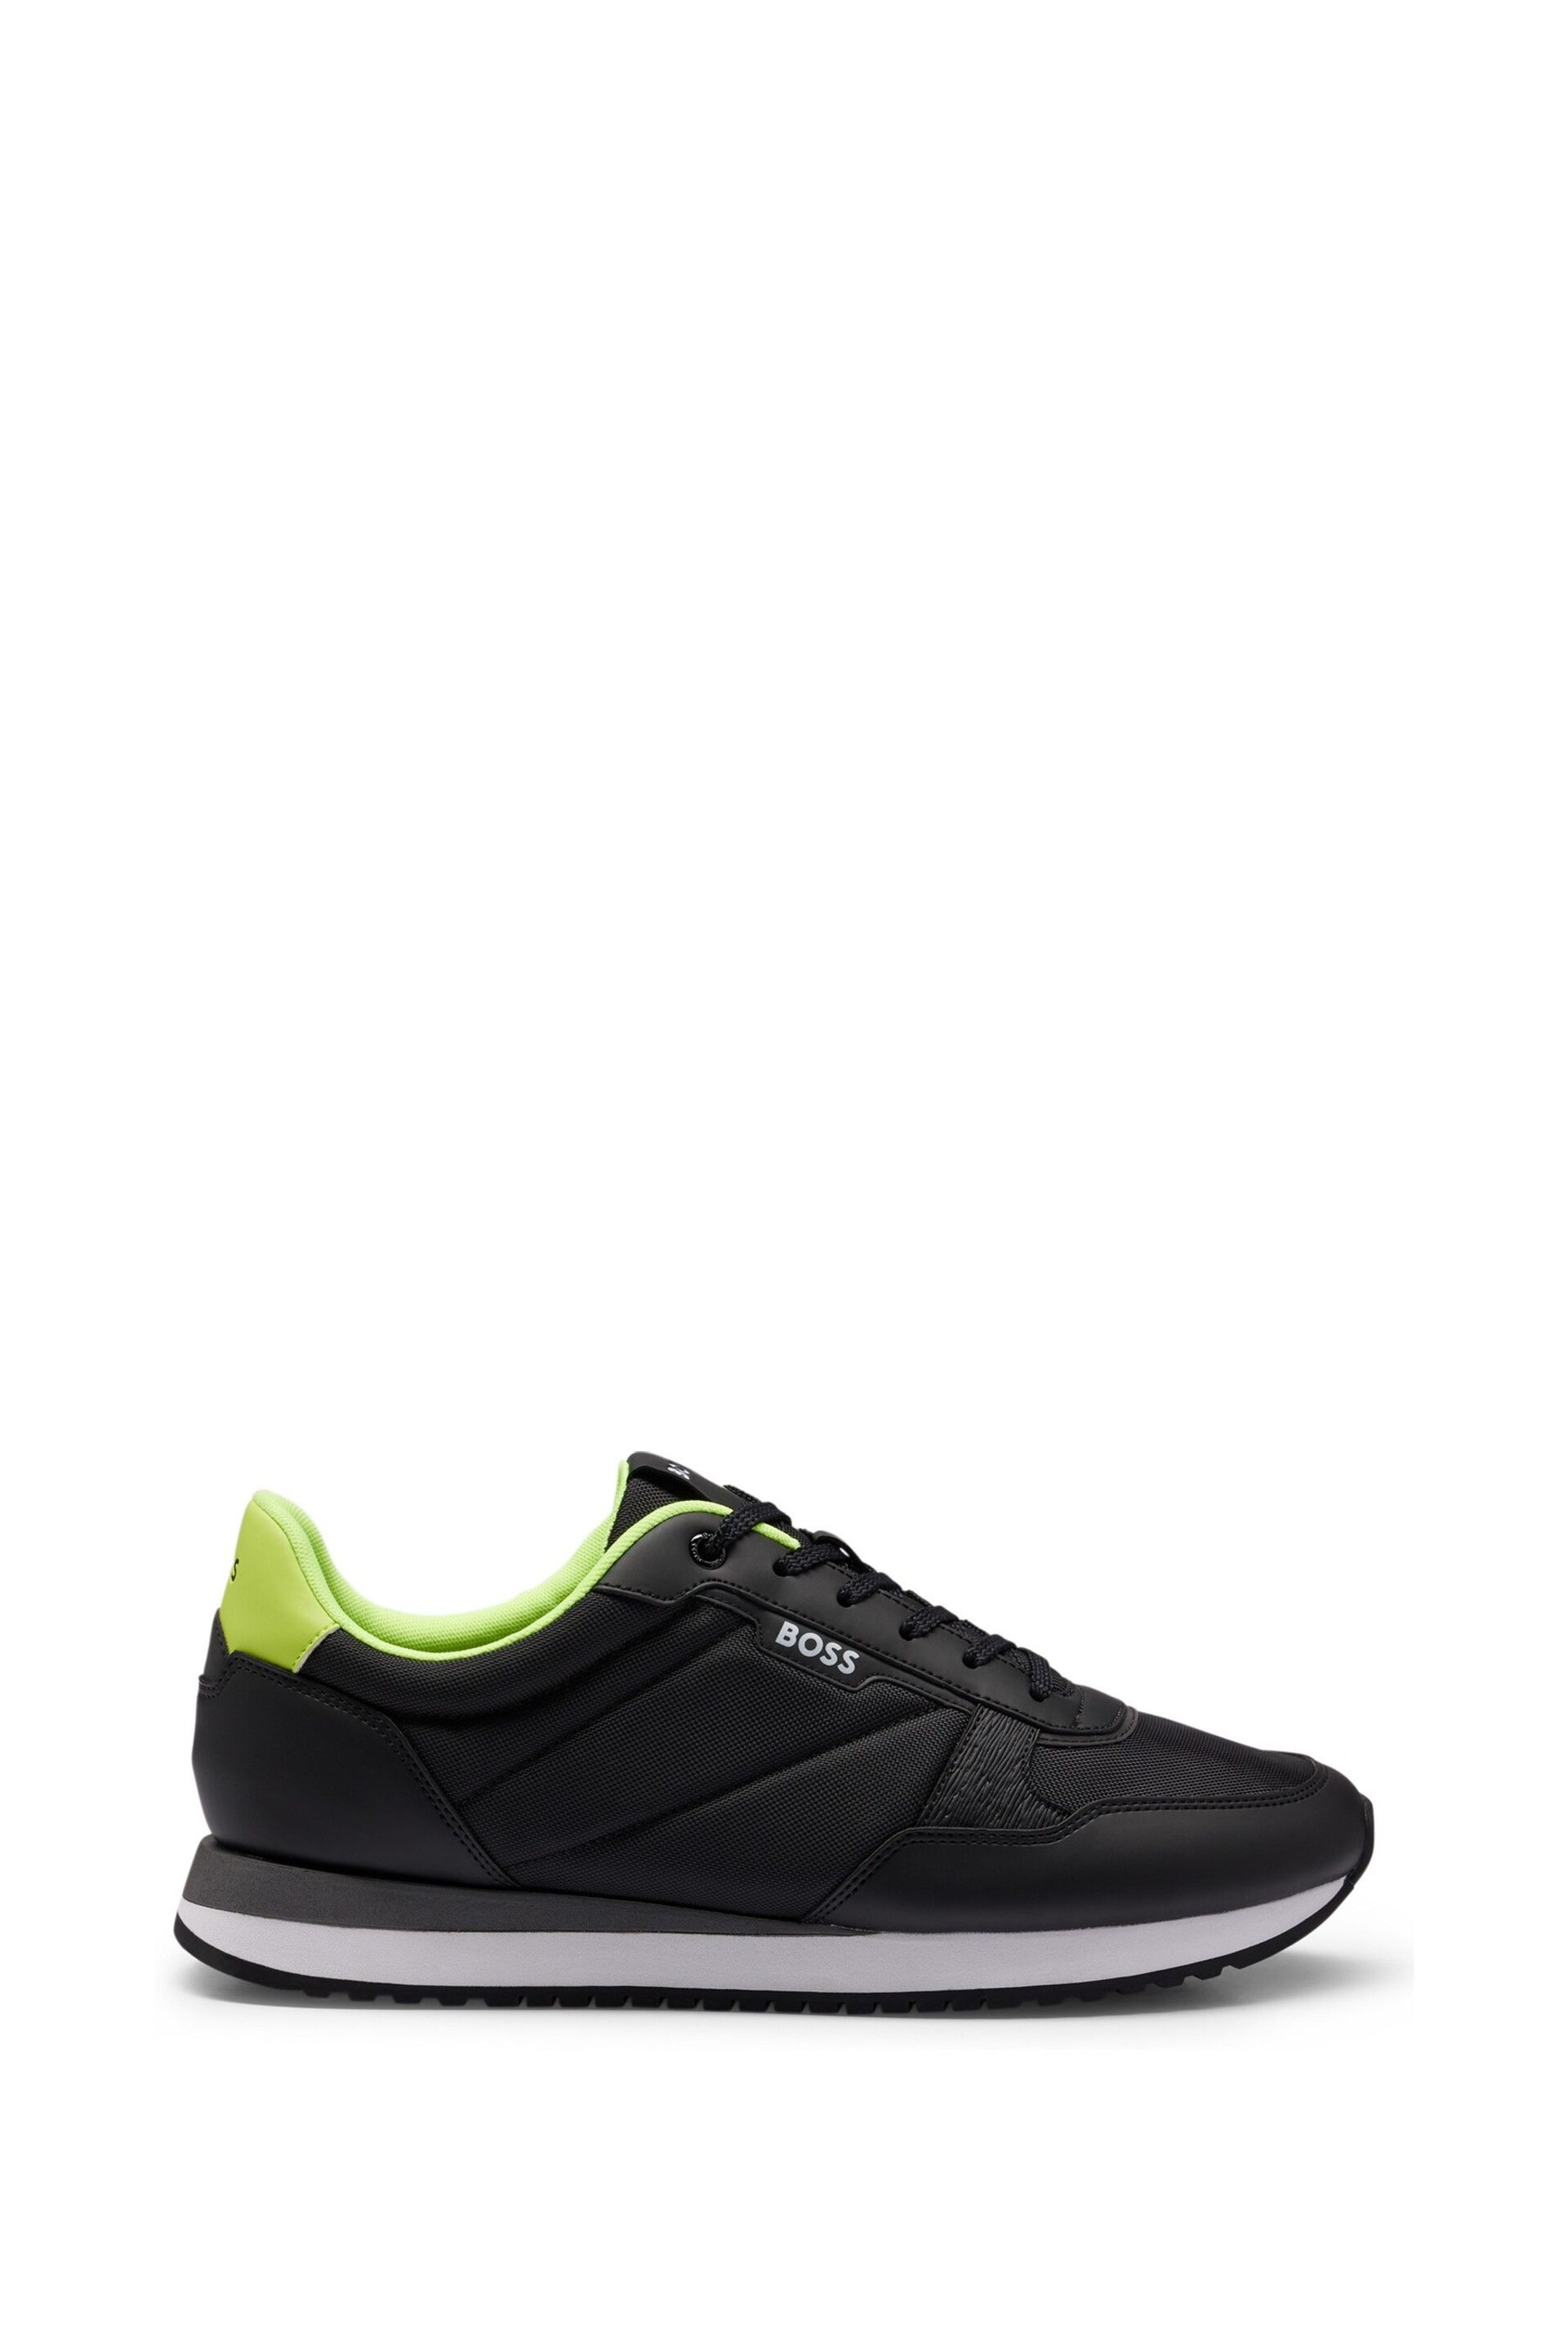 BOSS Black Mixed-Material Trainers With Pop-Colour Details - Image 1 of 5